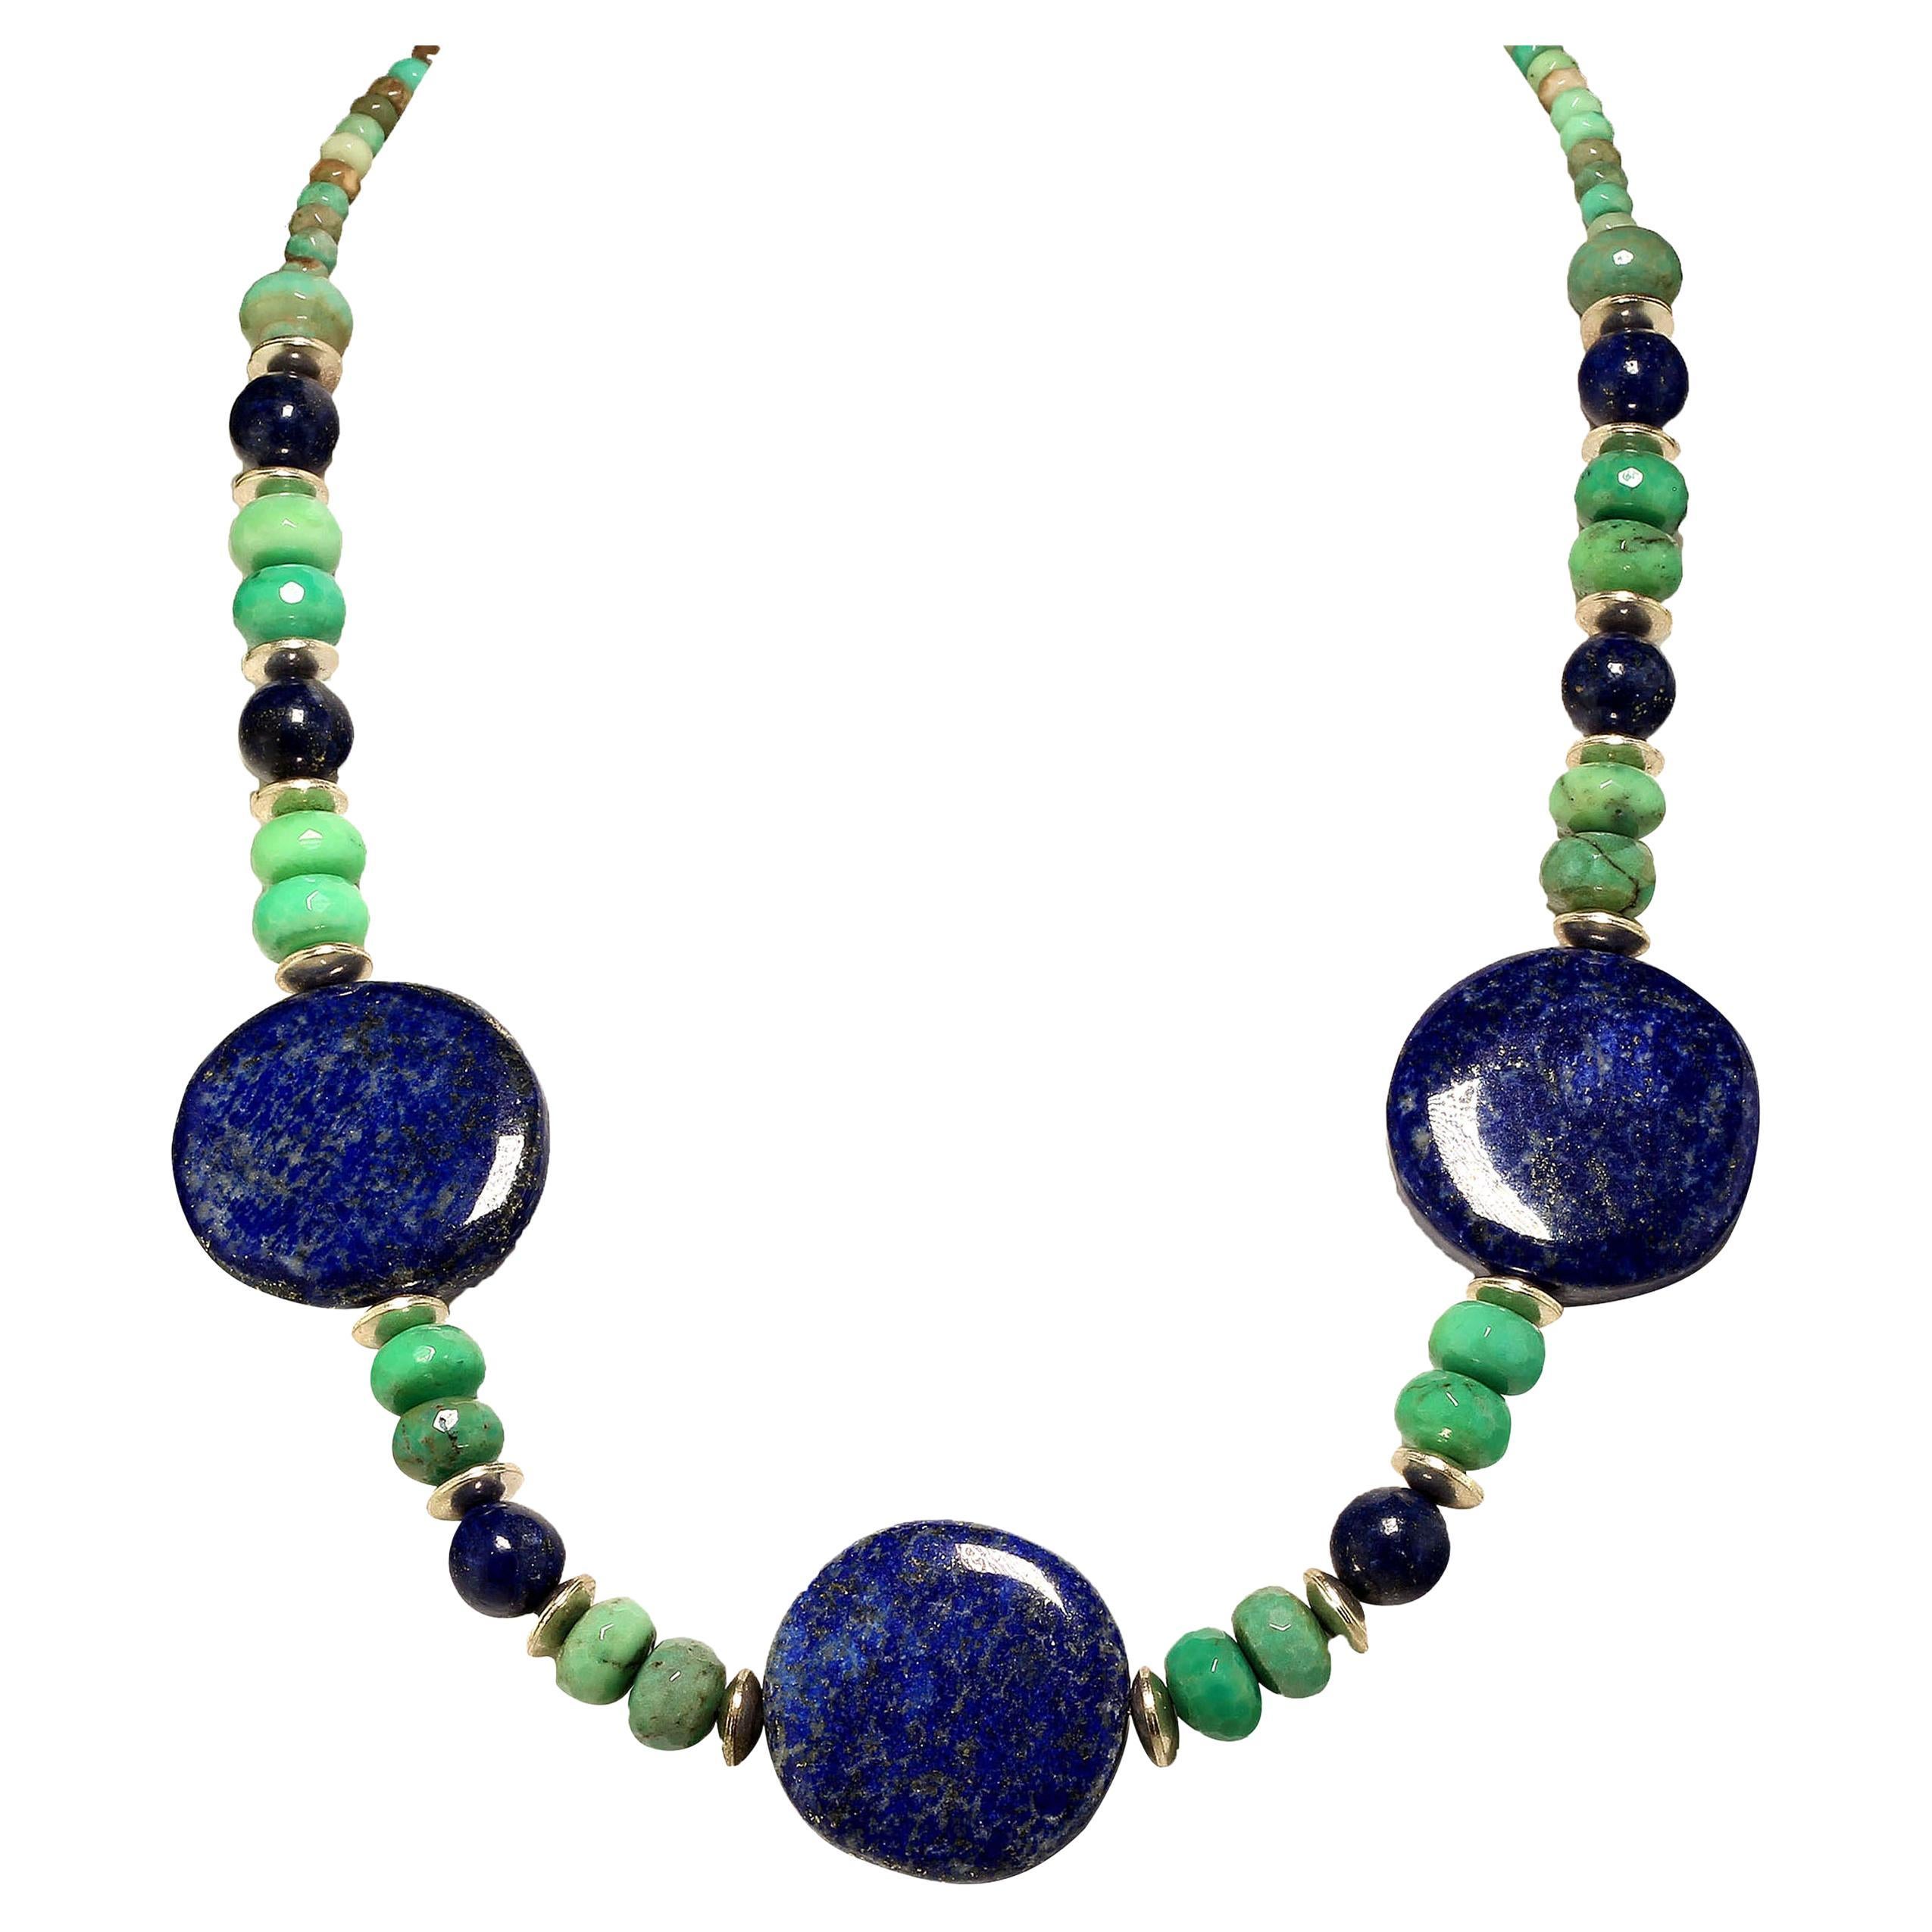 Stunning necklace of large, highly polished Lapis Lazuli Discs, average 37 MM, and 12 MM spheres of Lapis, and two sizes of Chrysophrase rondelles, all accented with silver tone rondelles. This necklace is 24 inches in length.